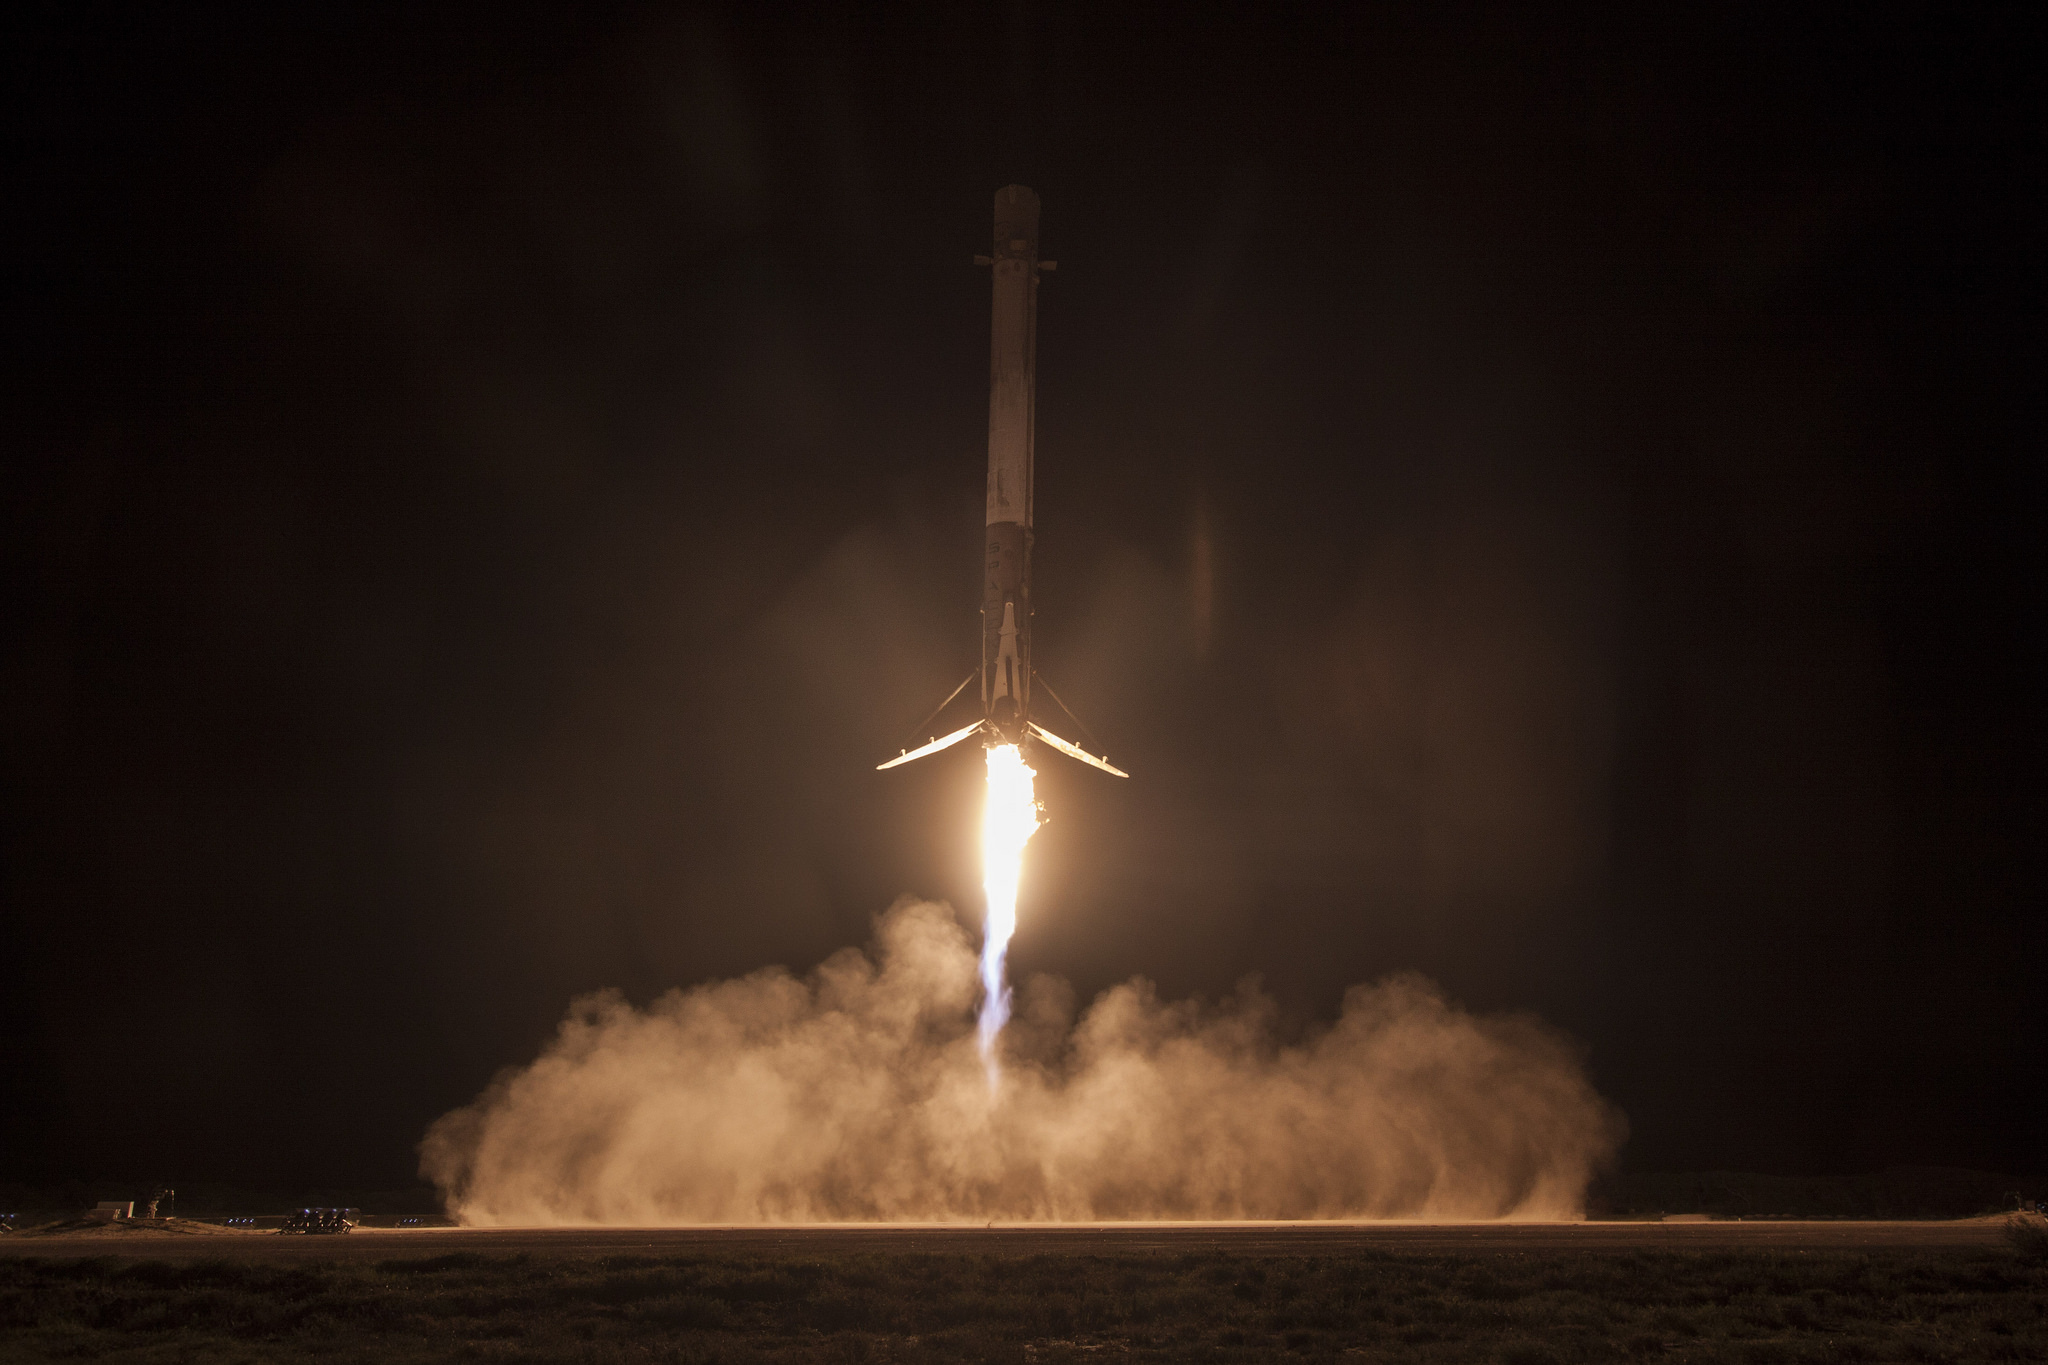 The Falcon-9 returns after launching Dragon on the CRS-9 resupply mission to the ISS for NASA. Photo Credit: SpaceX